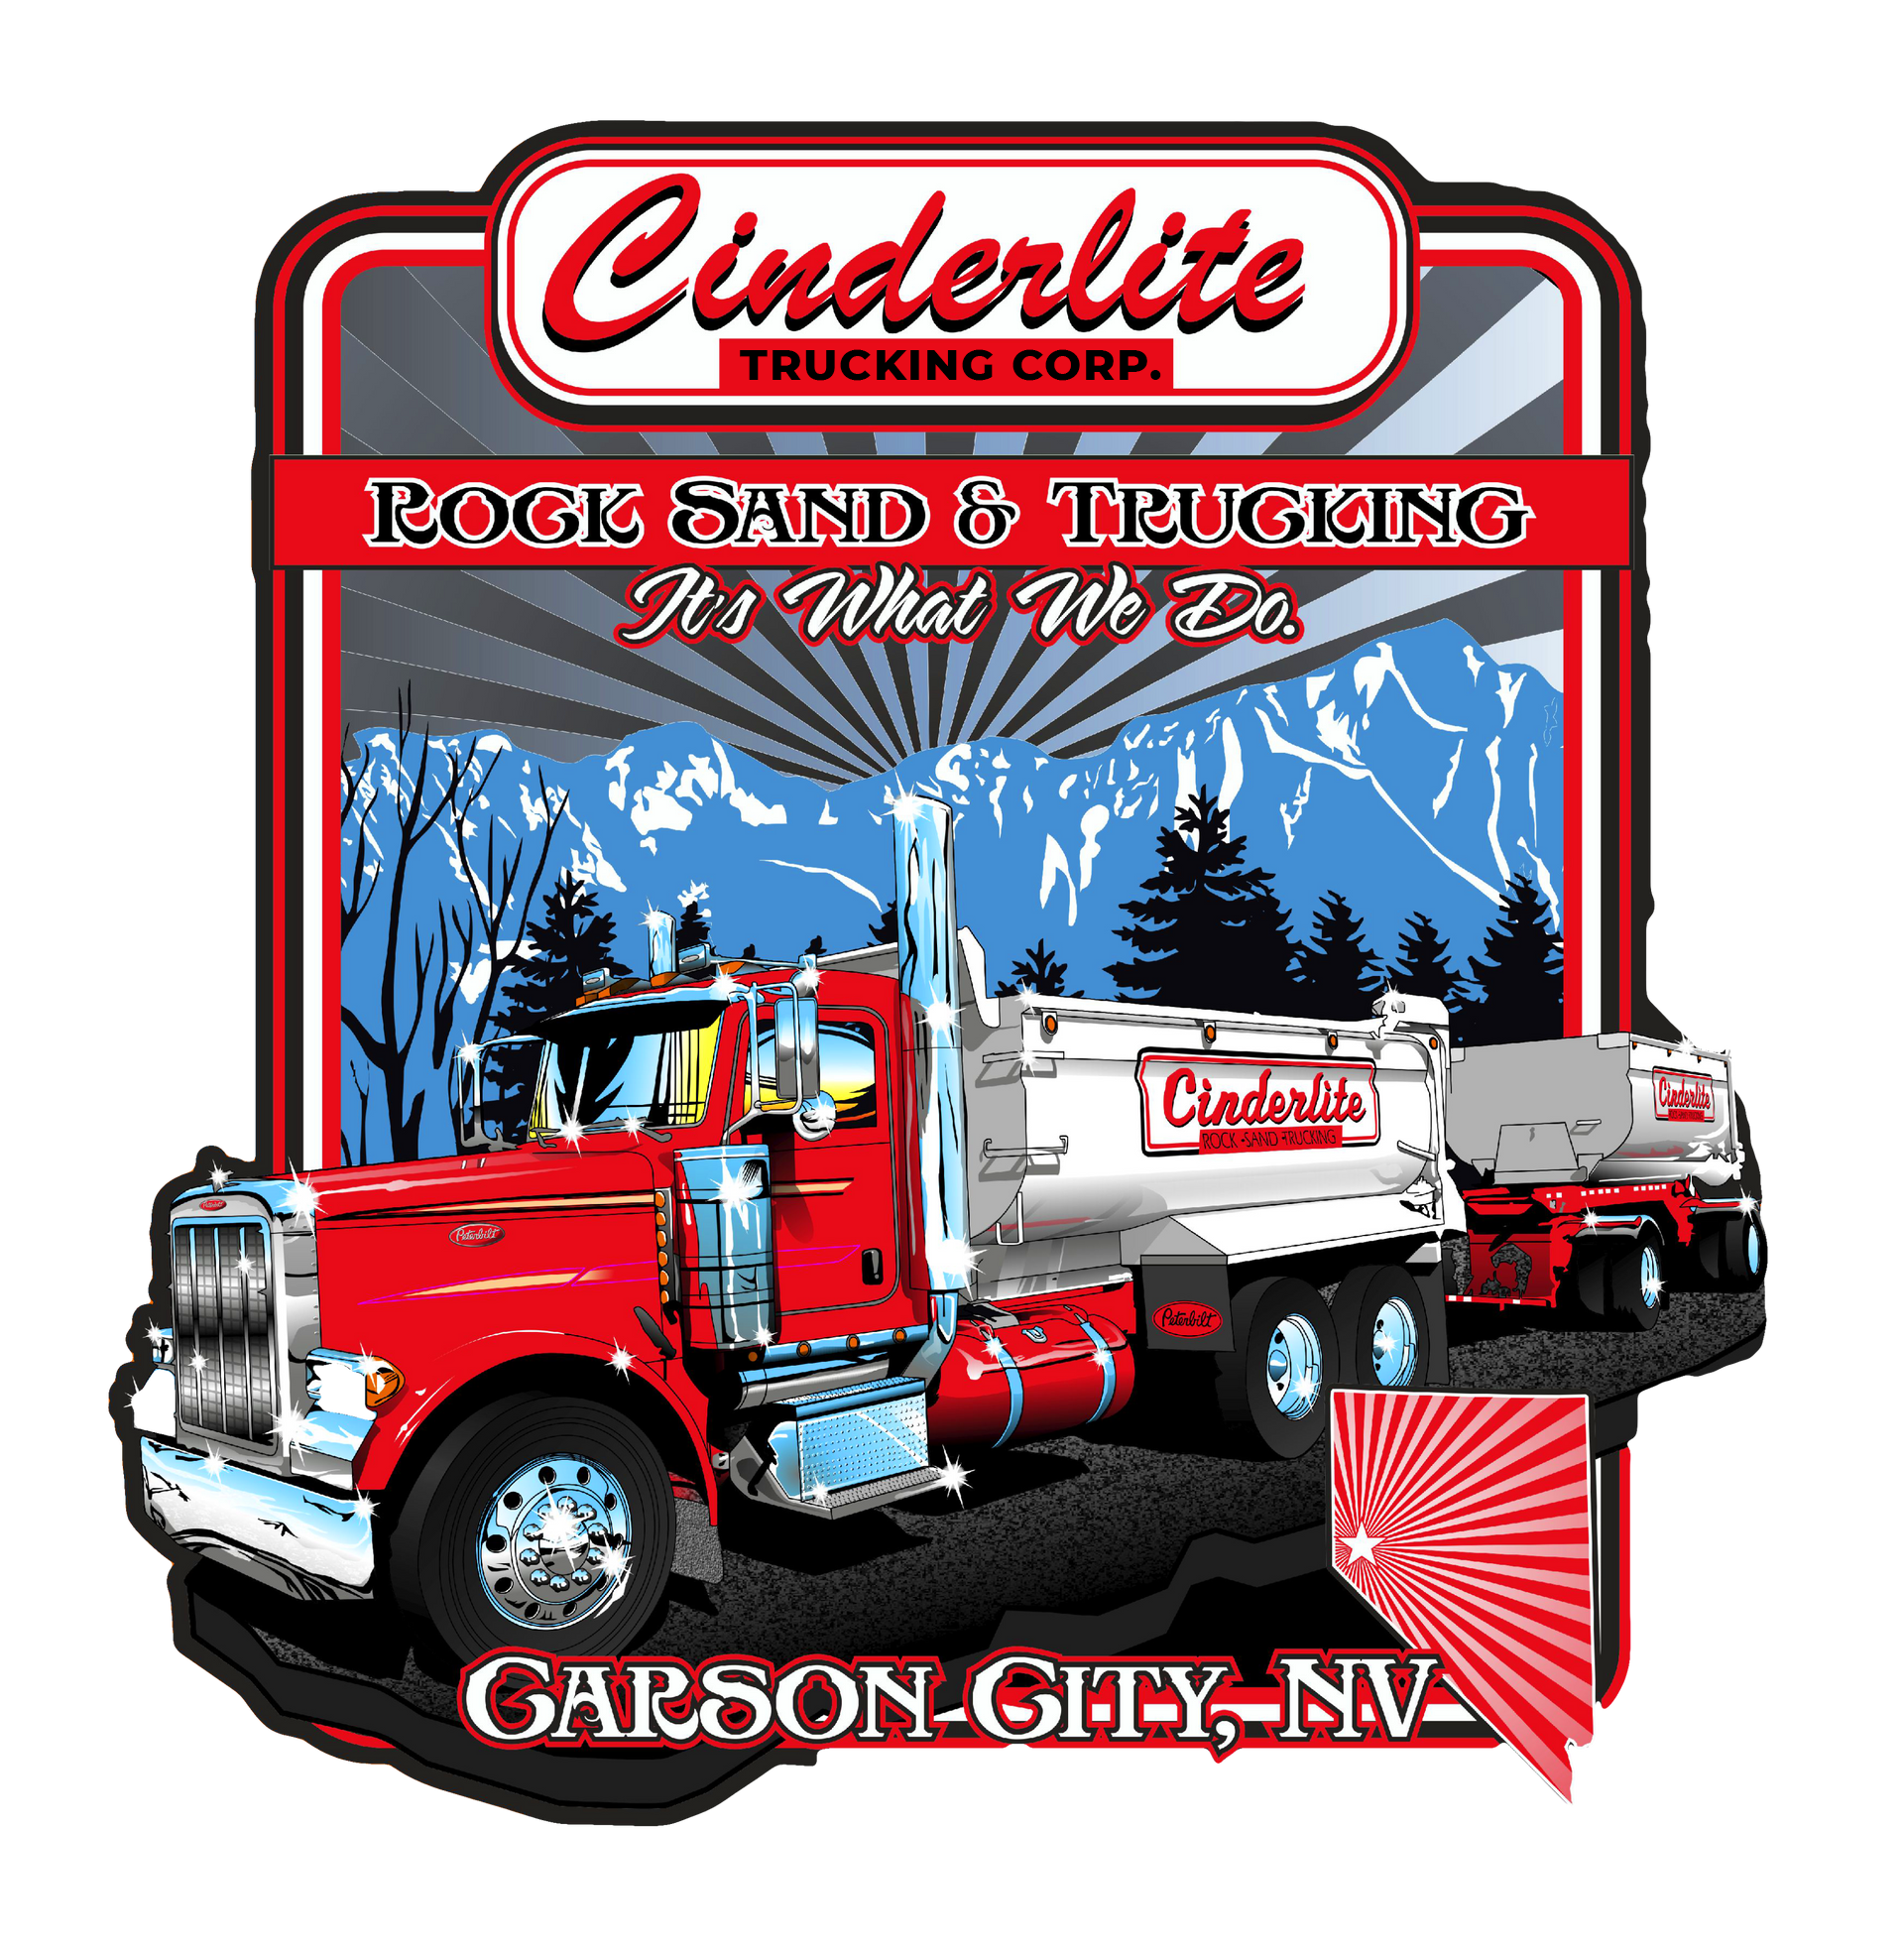 A poster for cinderlite trucking company shows a dump truck